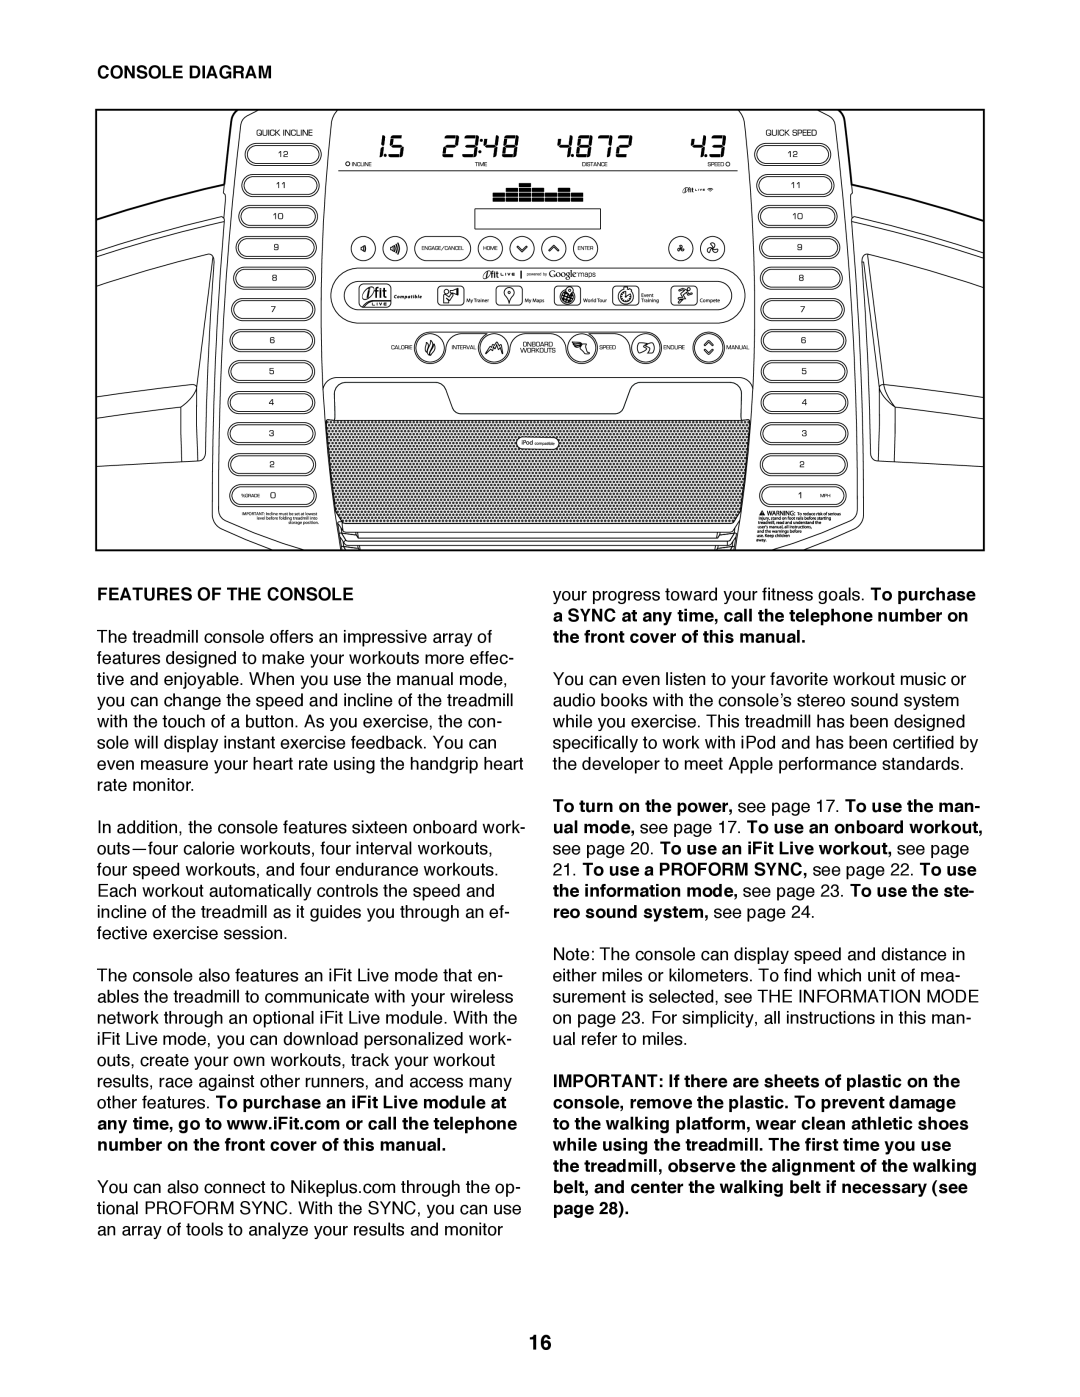 ProForm 795 user manual Console Diagram, Features Of The Console 